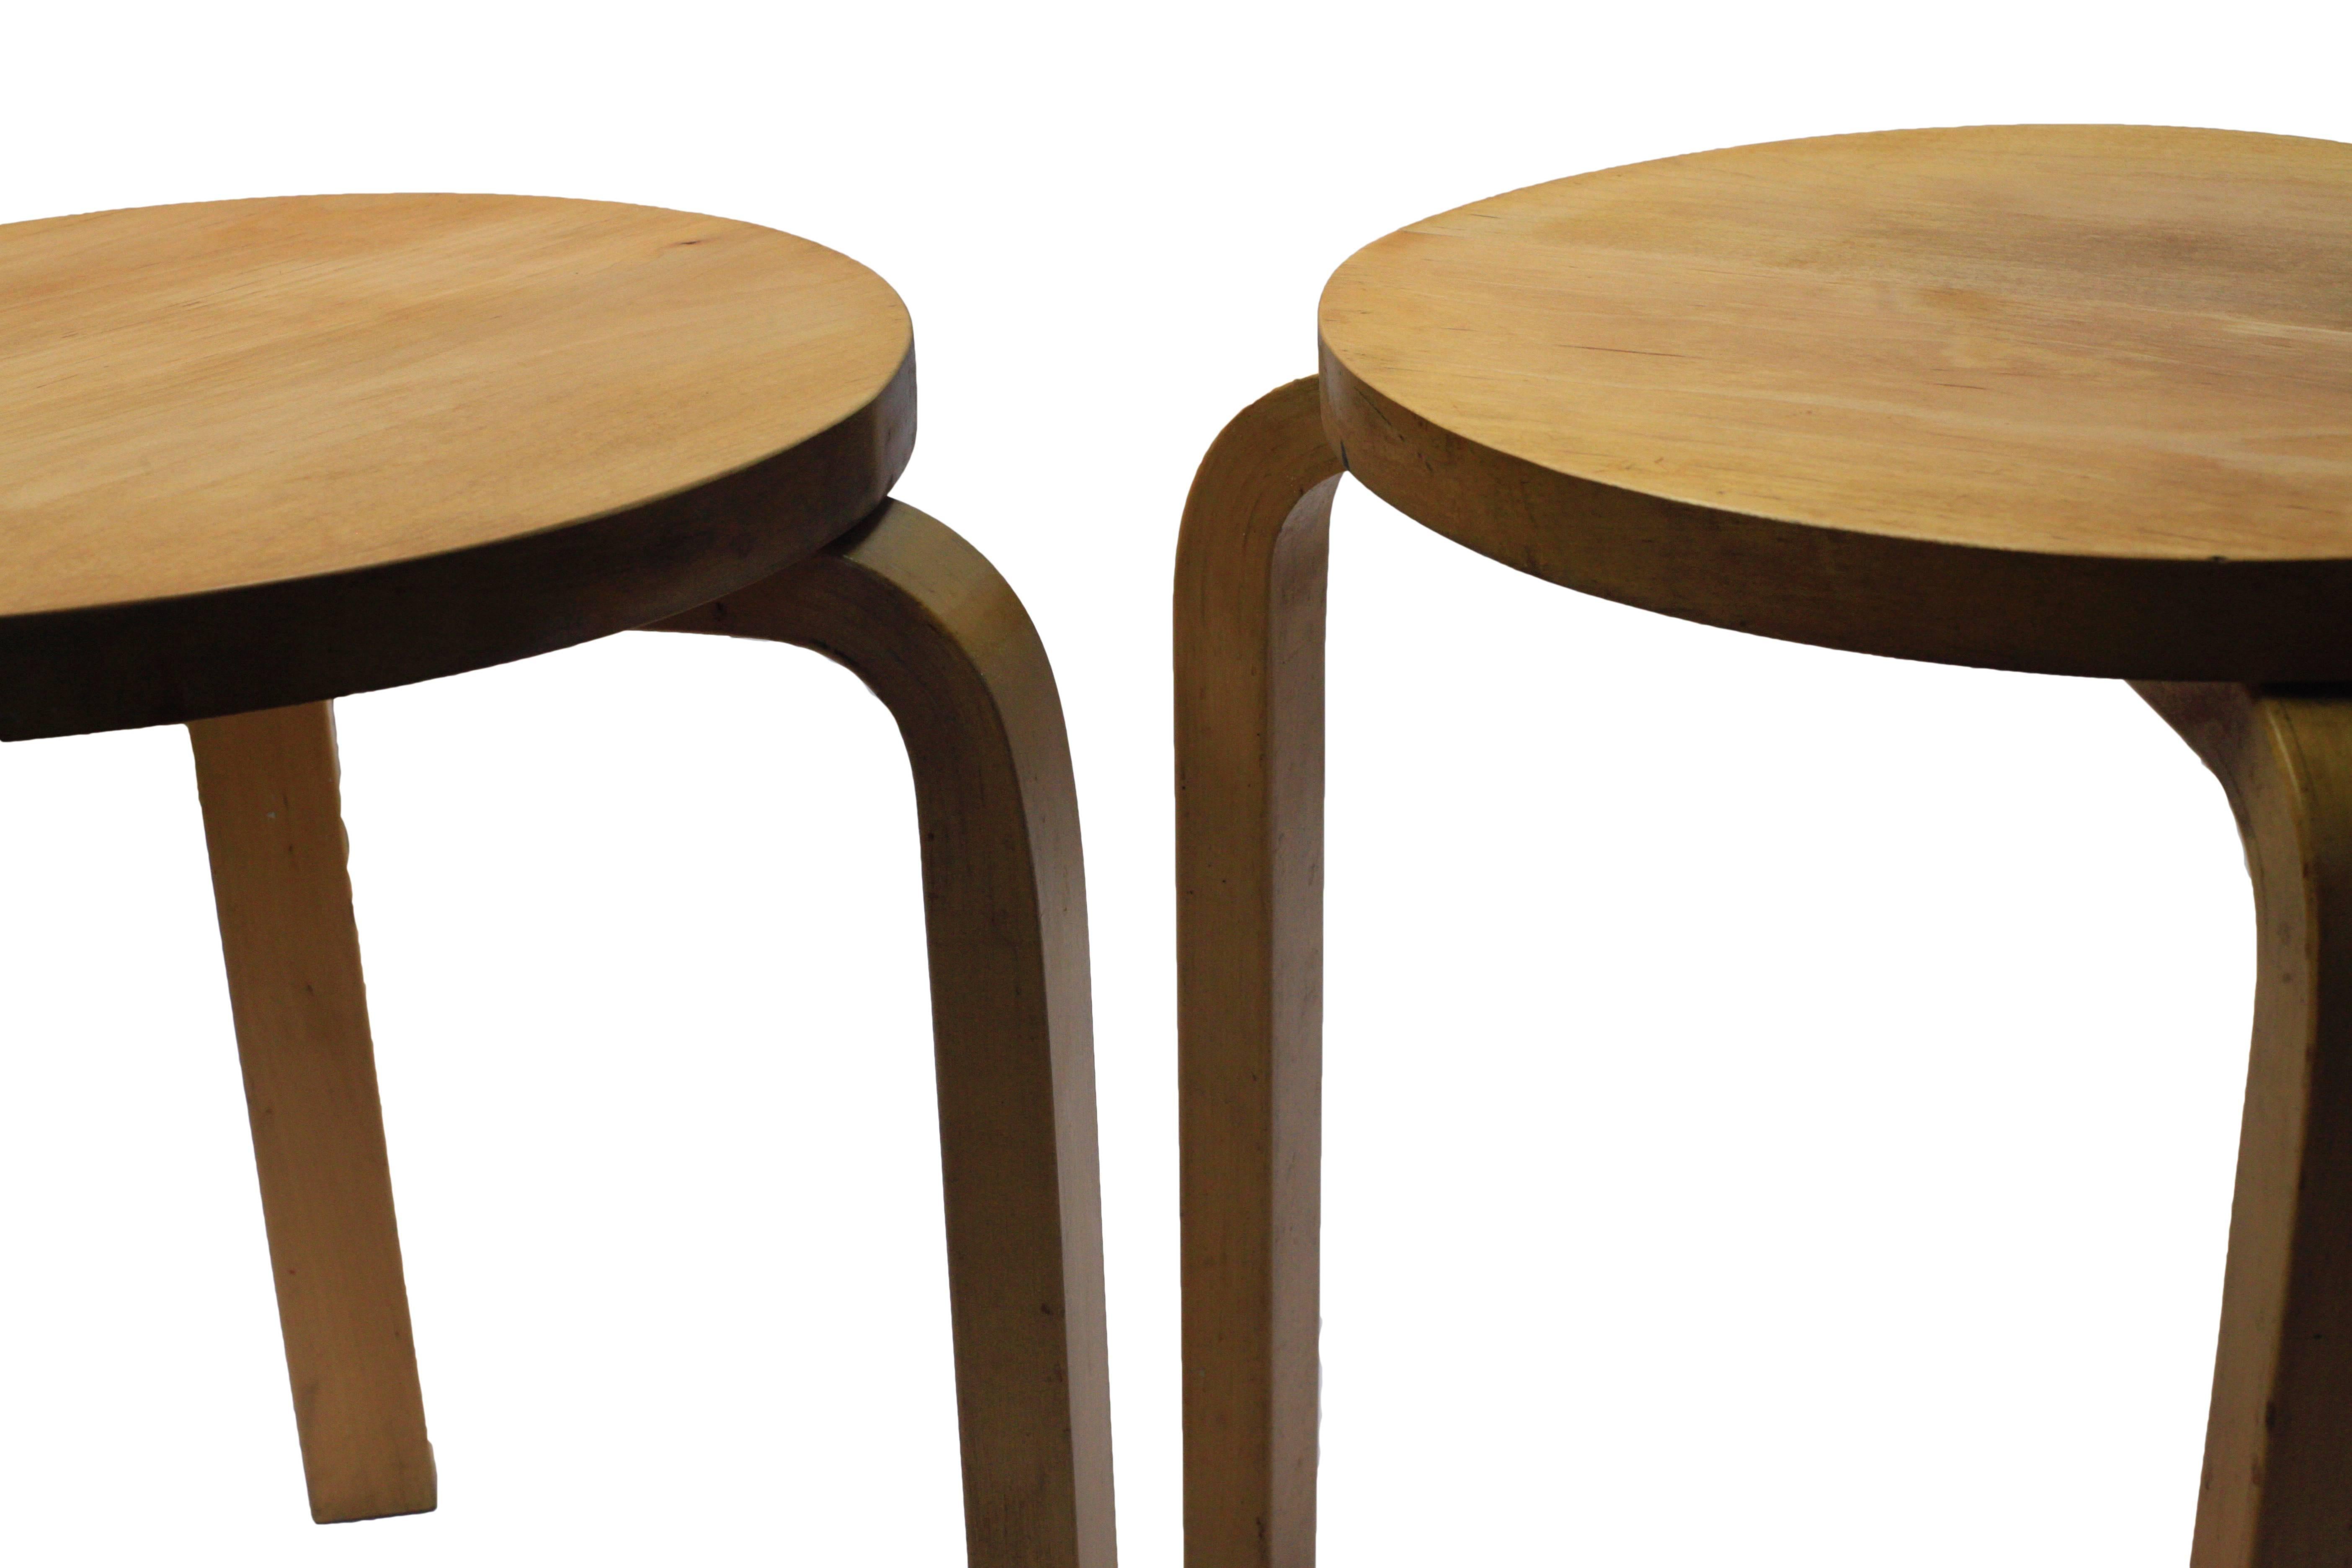 Beautiful early pair of stacking stools designed by Alvar Aalto circa 1931-1932 for Artek. Solid birch tops that were lightly refinished.